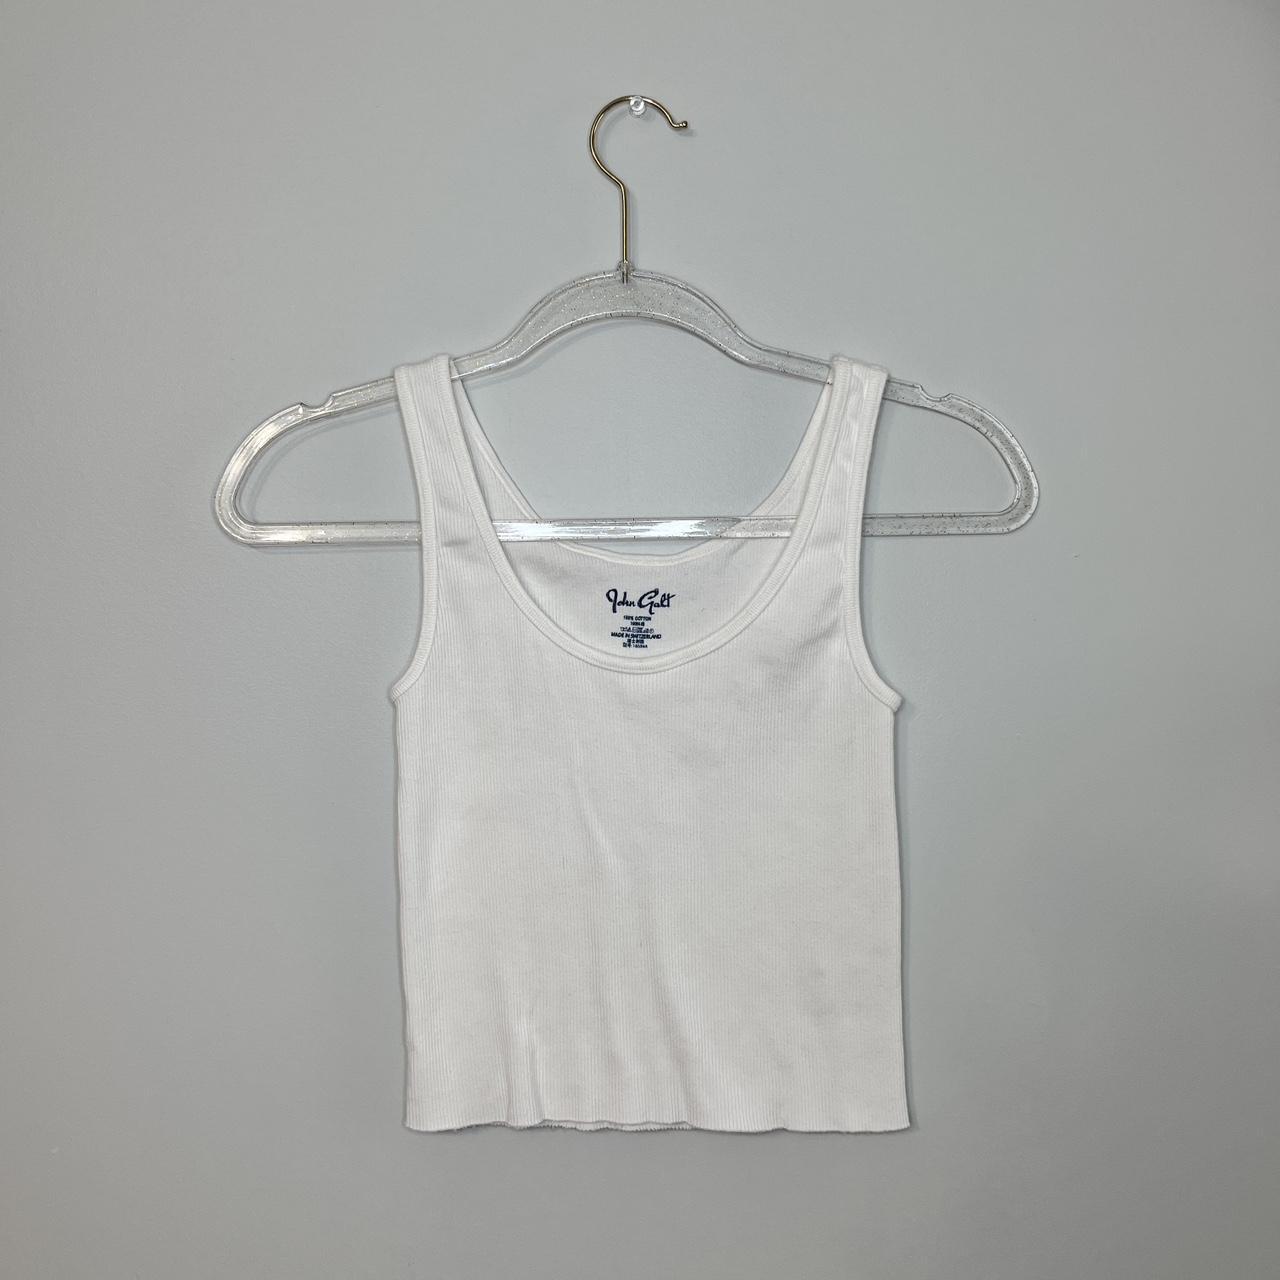 Brandy Melville White Tank with Red Trim